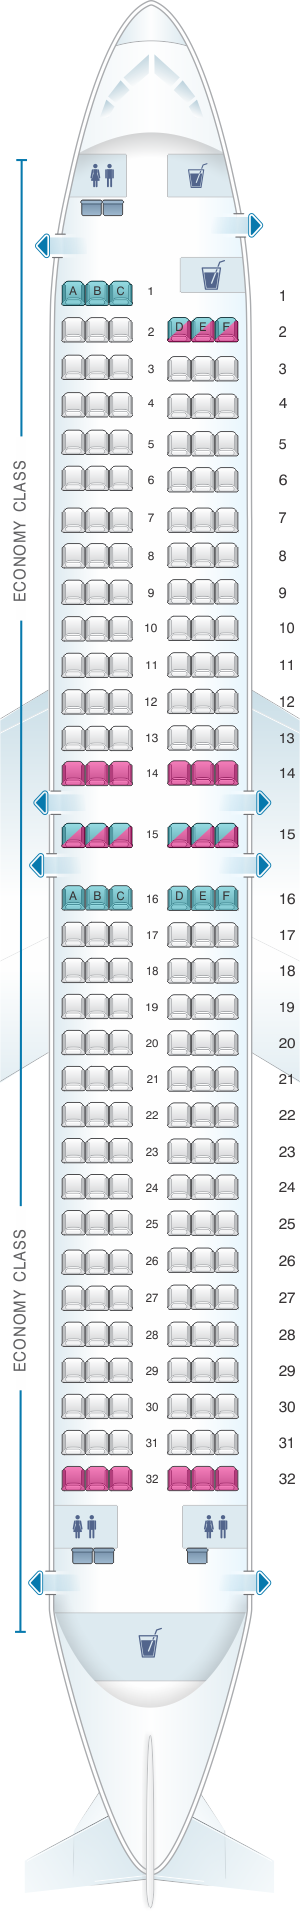 Seat map for Rossiya Airlines Boeing B737 800 189PAX V1